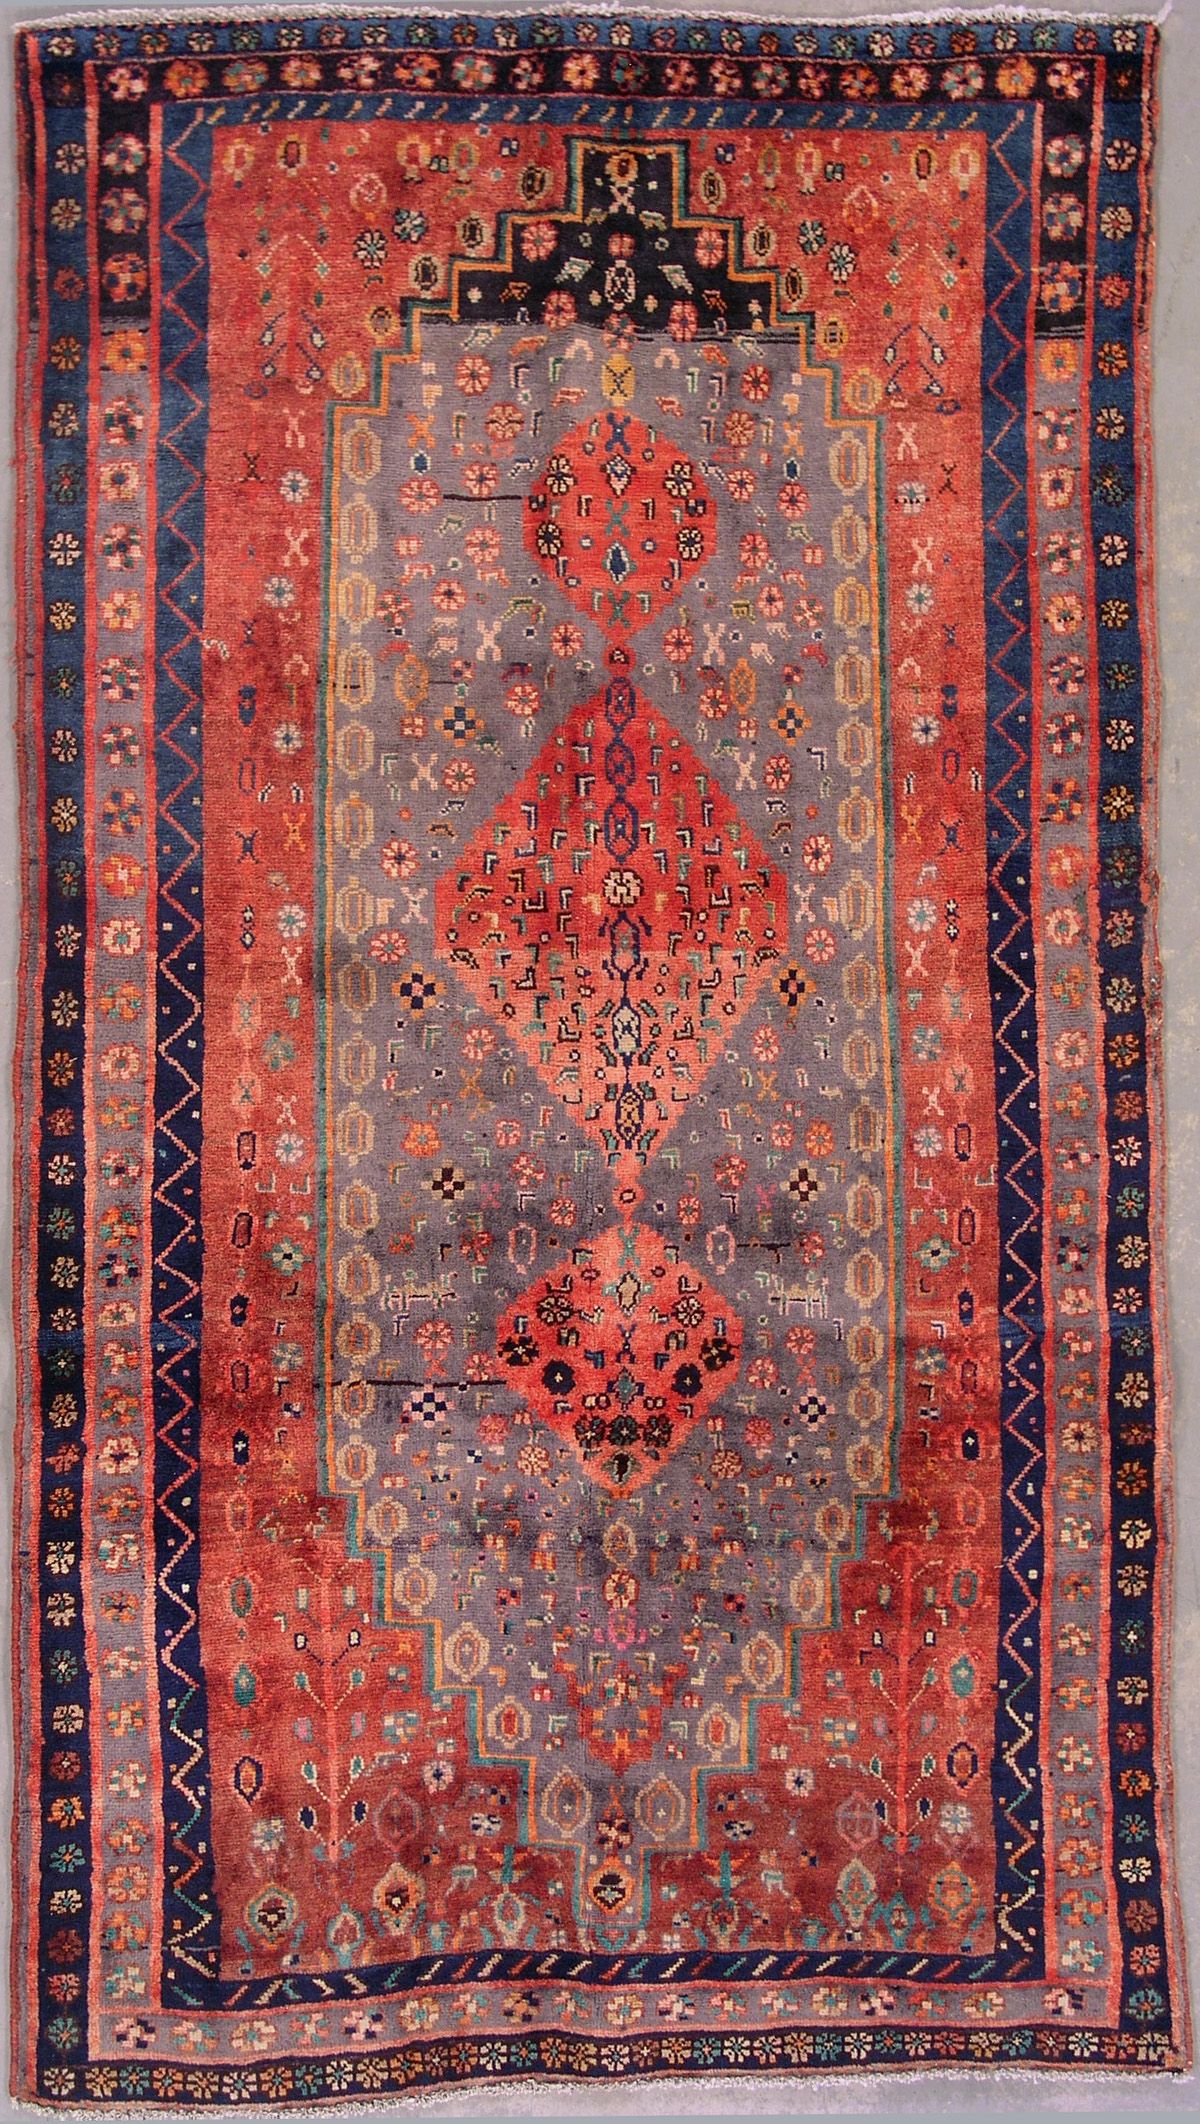   PERSIAN SARAB ORIENTAL HAND KNOTTED WOOL AREA RUG CARPET W/ ABRASH